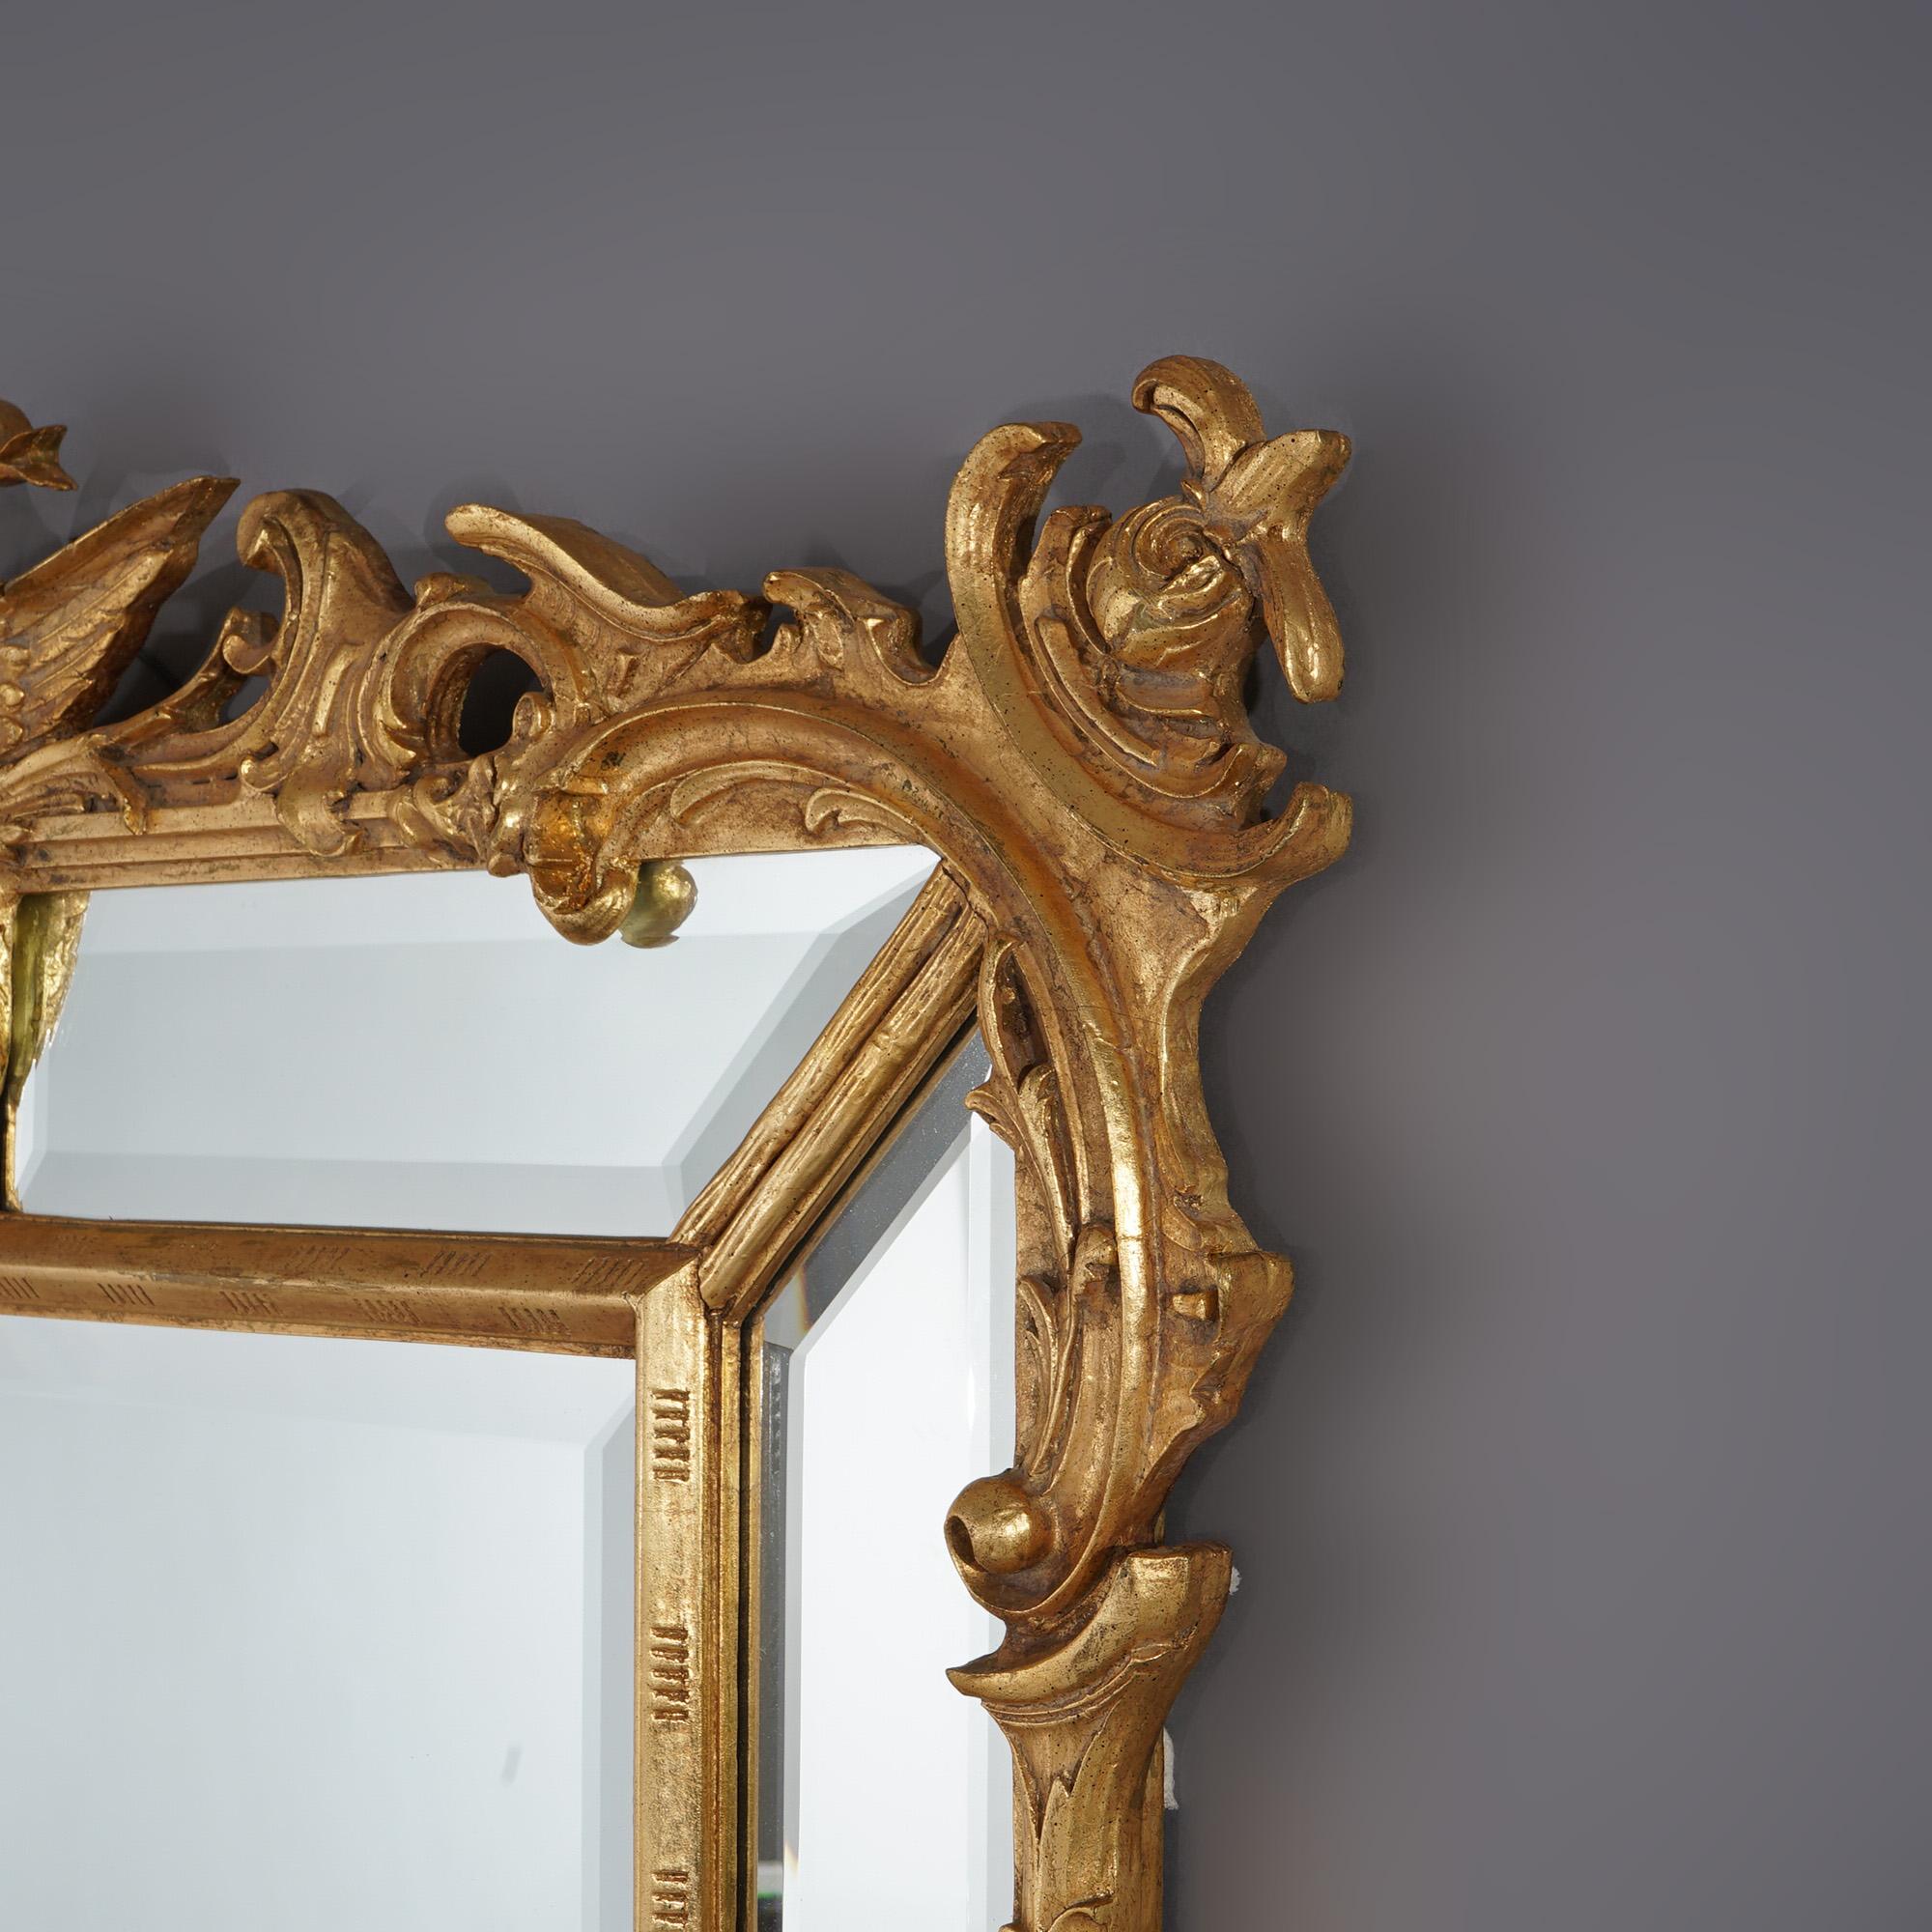 Figural Chinese Chippendale Parclose Giltwood Wall Mirror with Phoenix 20th C For Sale 13